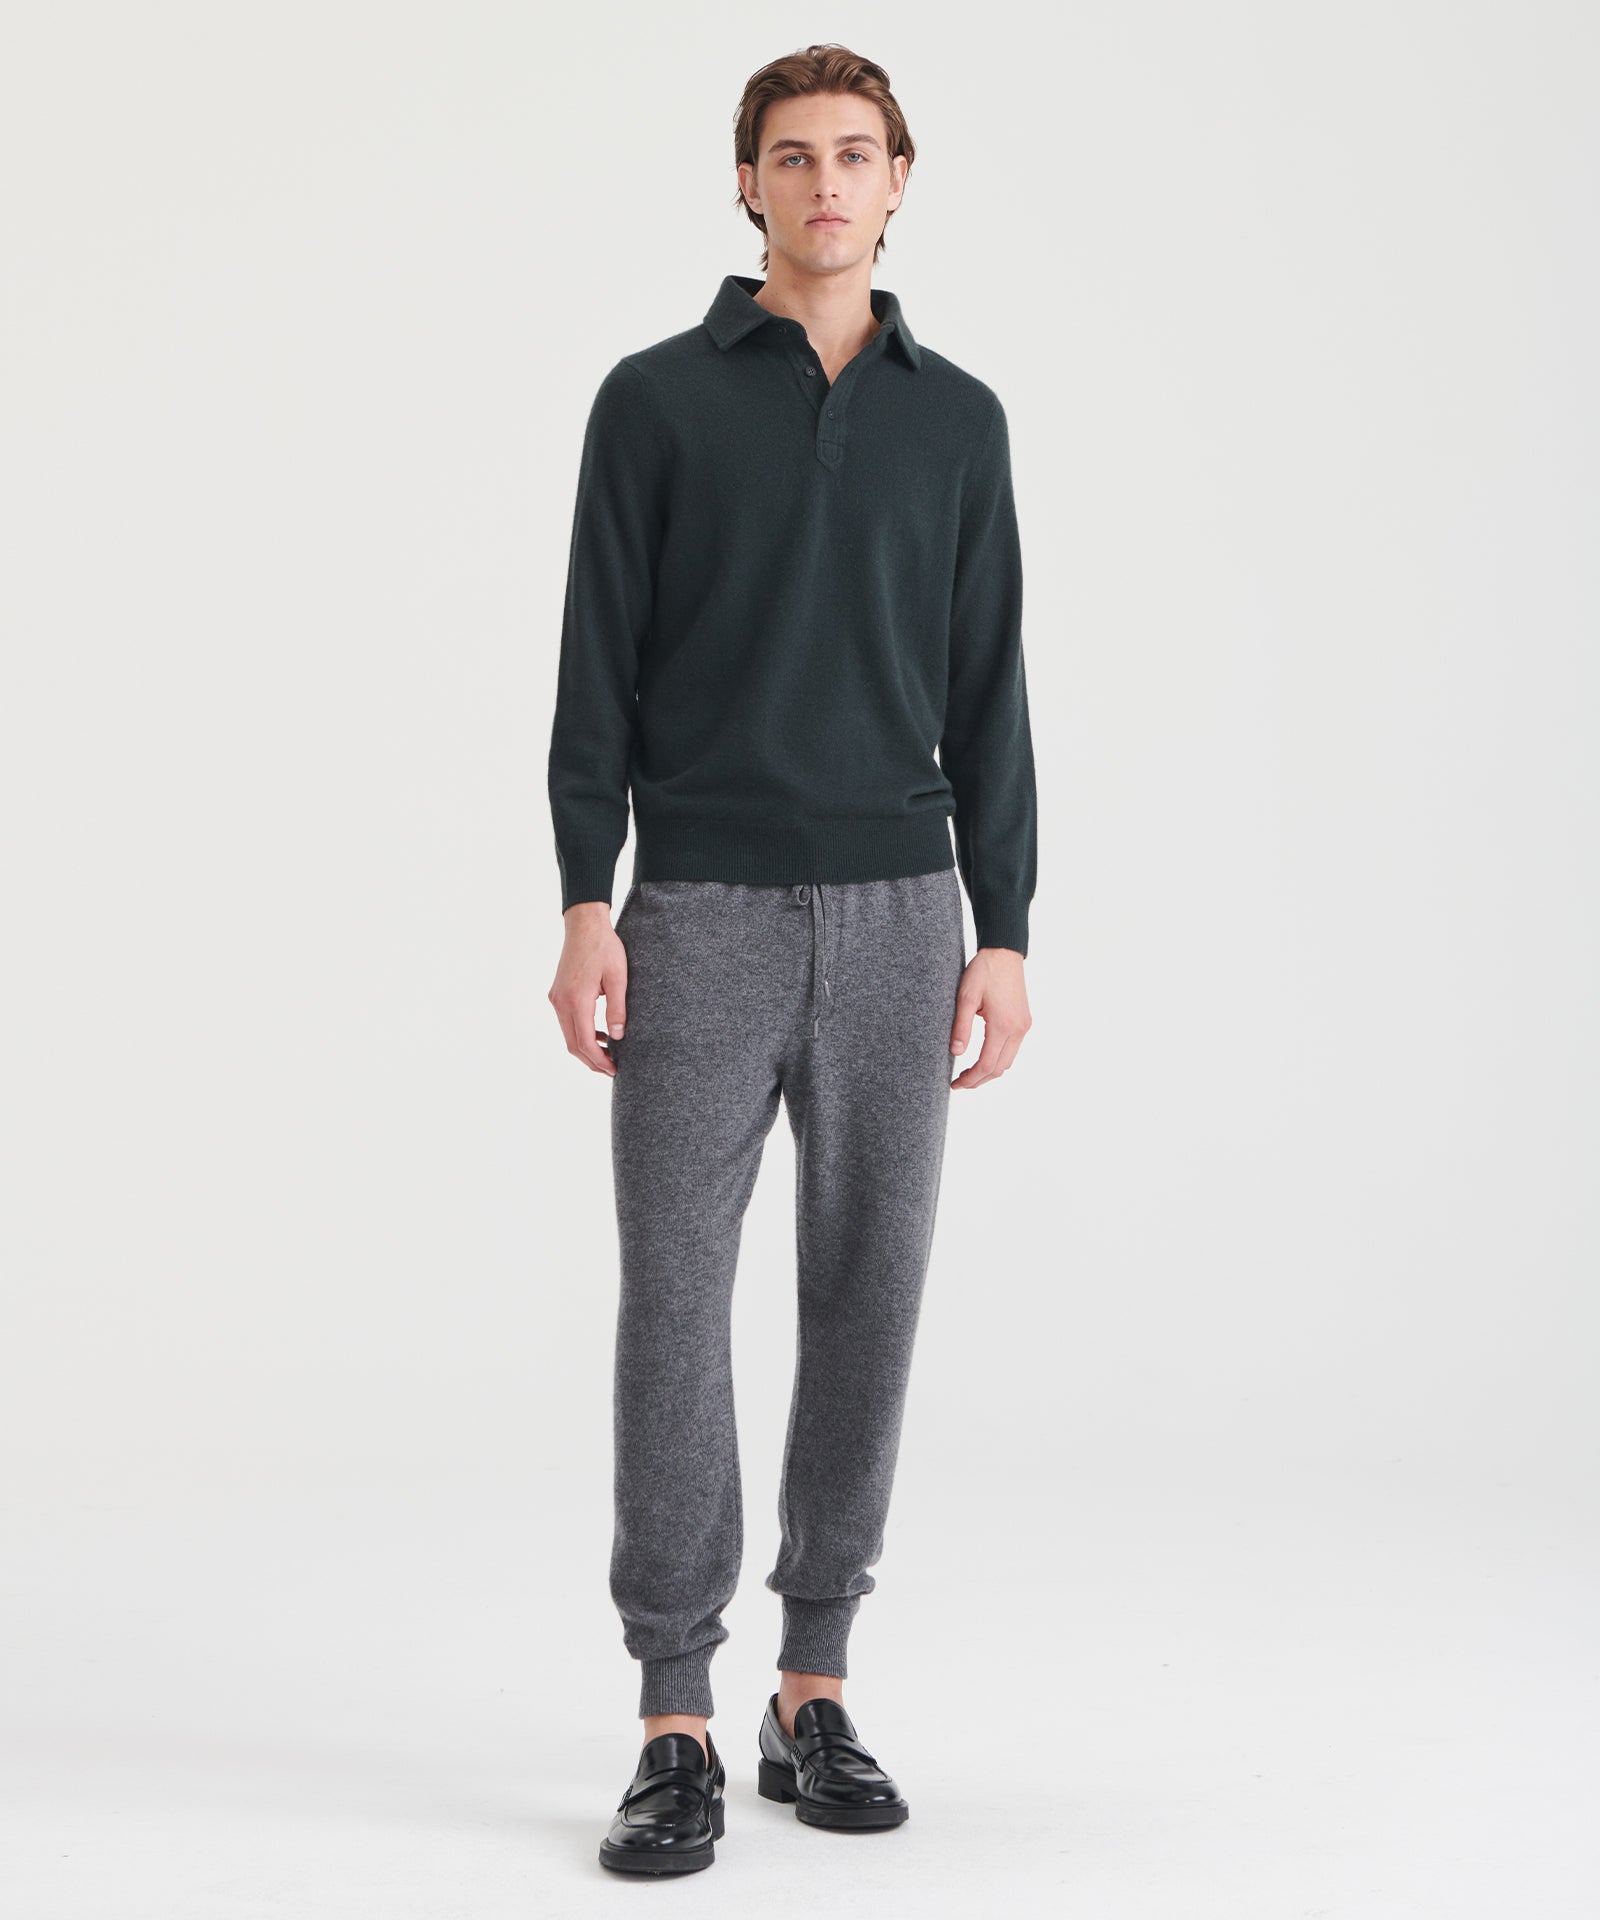 GHIAIA CASHMERE Tapered Cashmere Sweatpants for Men